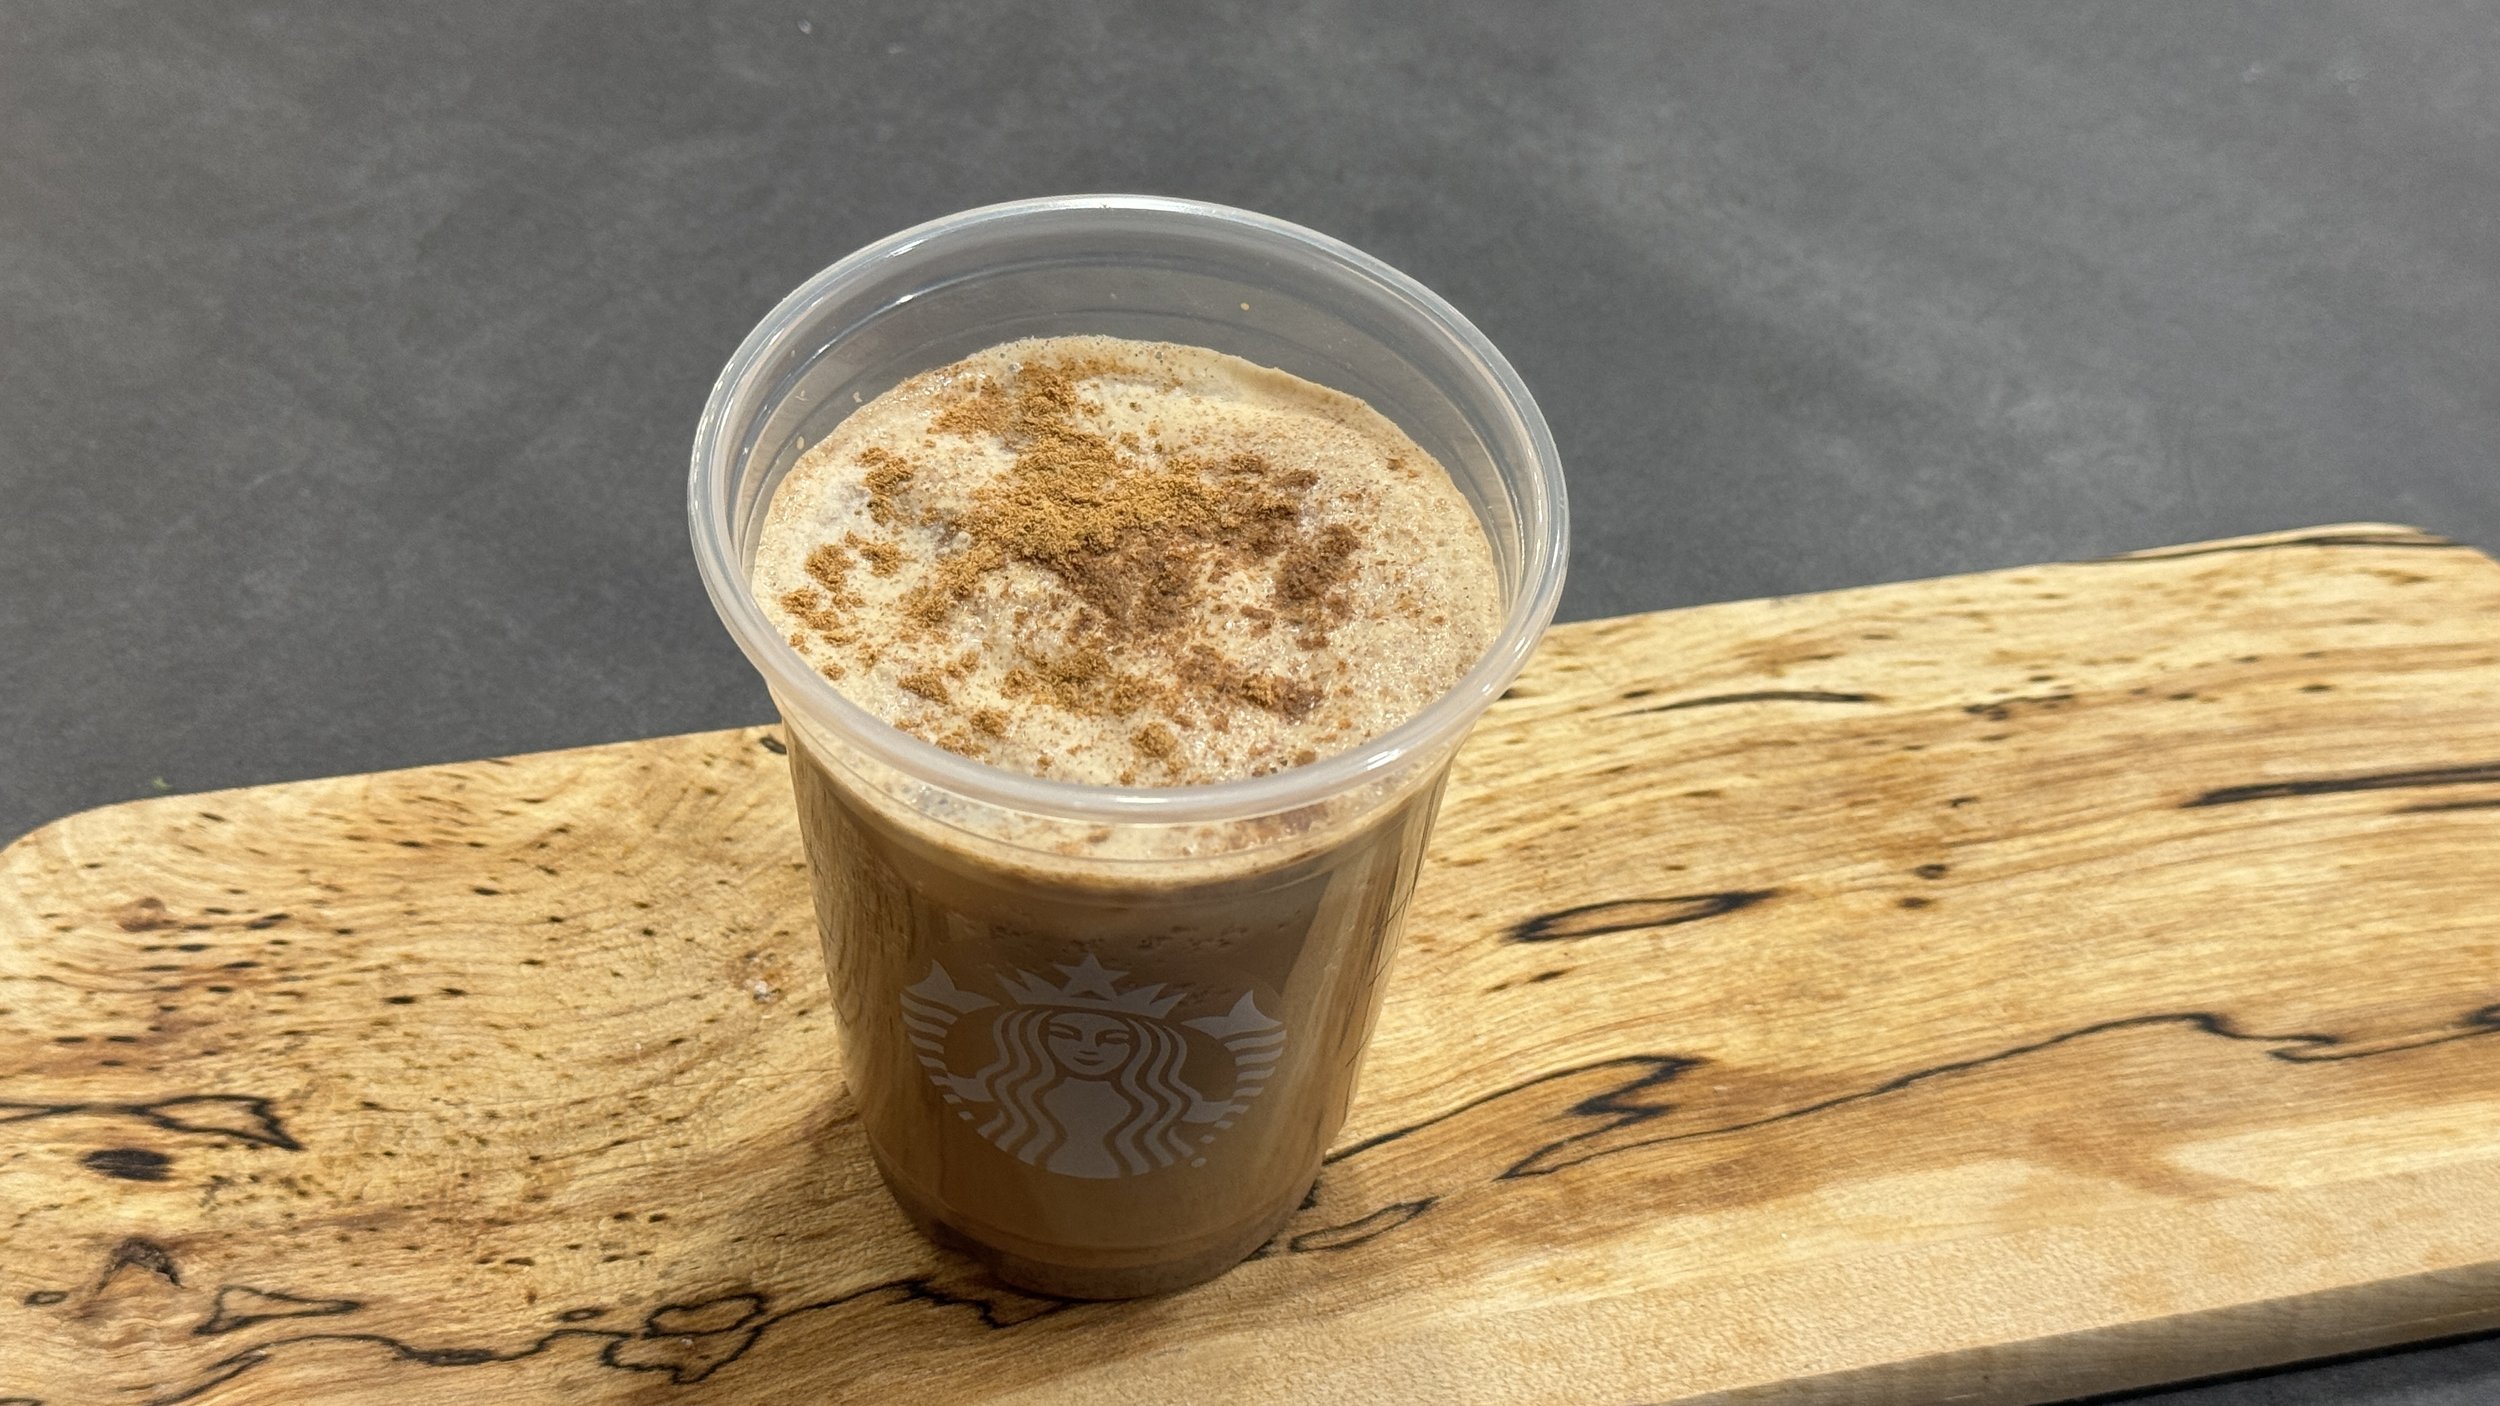 Starbucks Iced Gingerbread Chai Latte Copycat Recipe — Cooking with Anadi